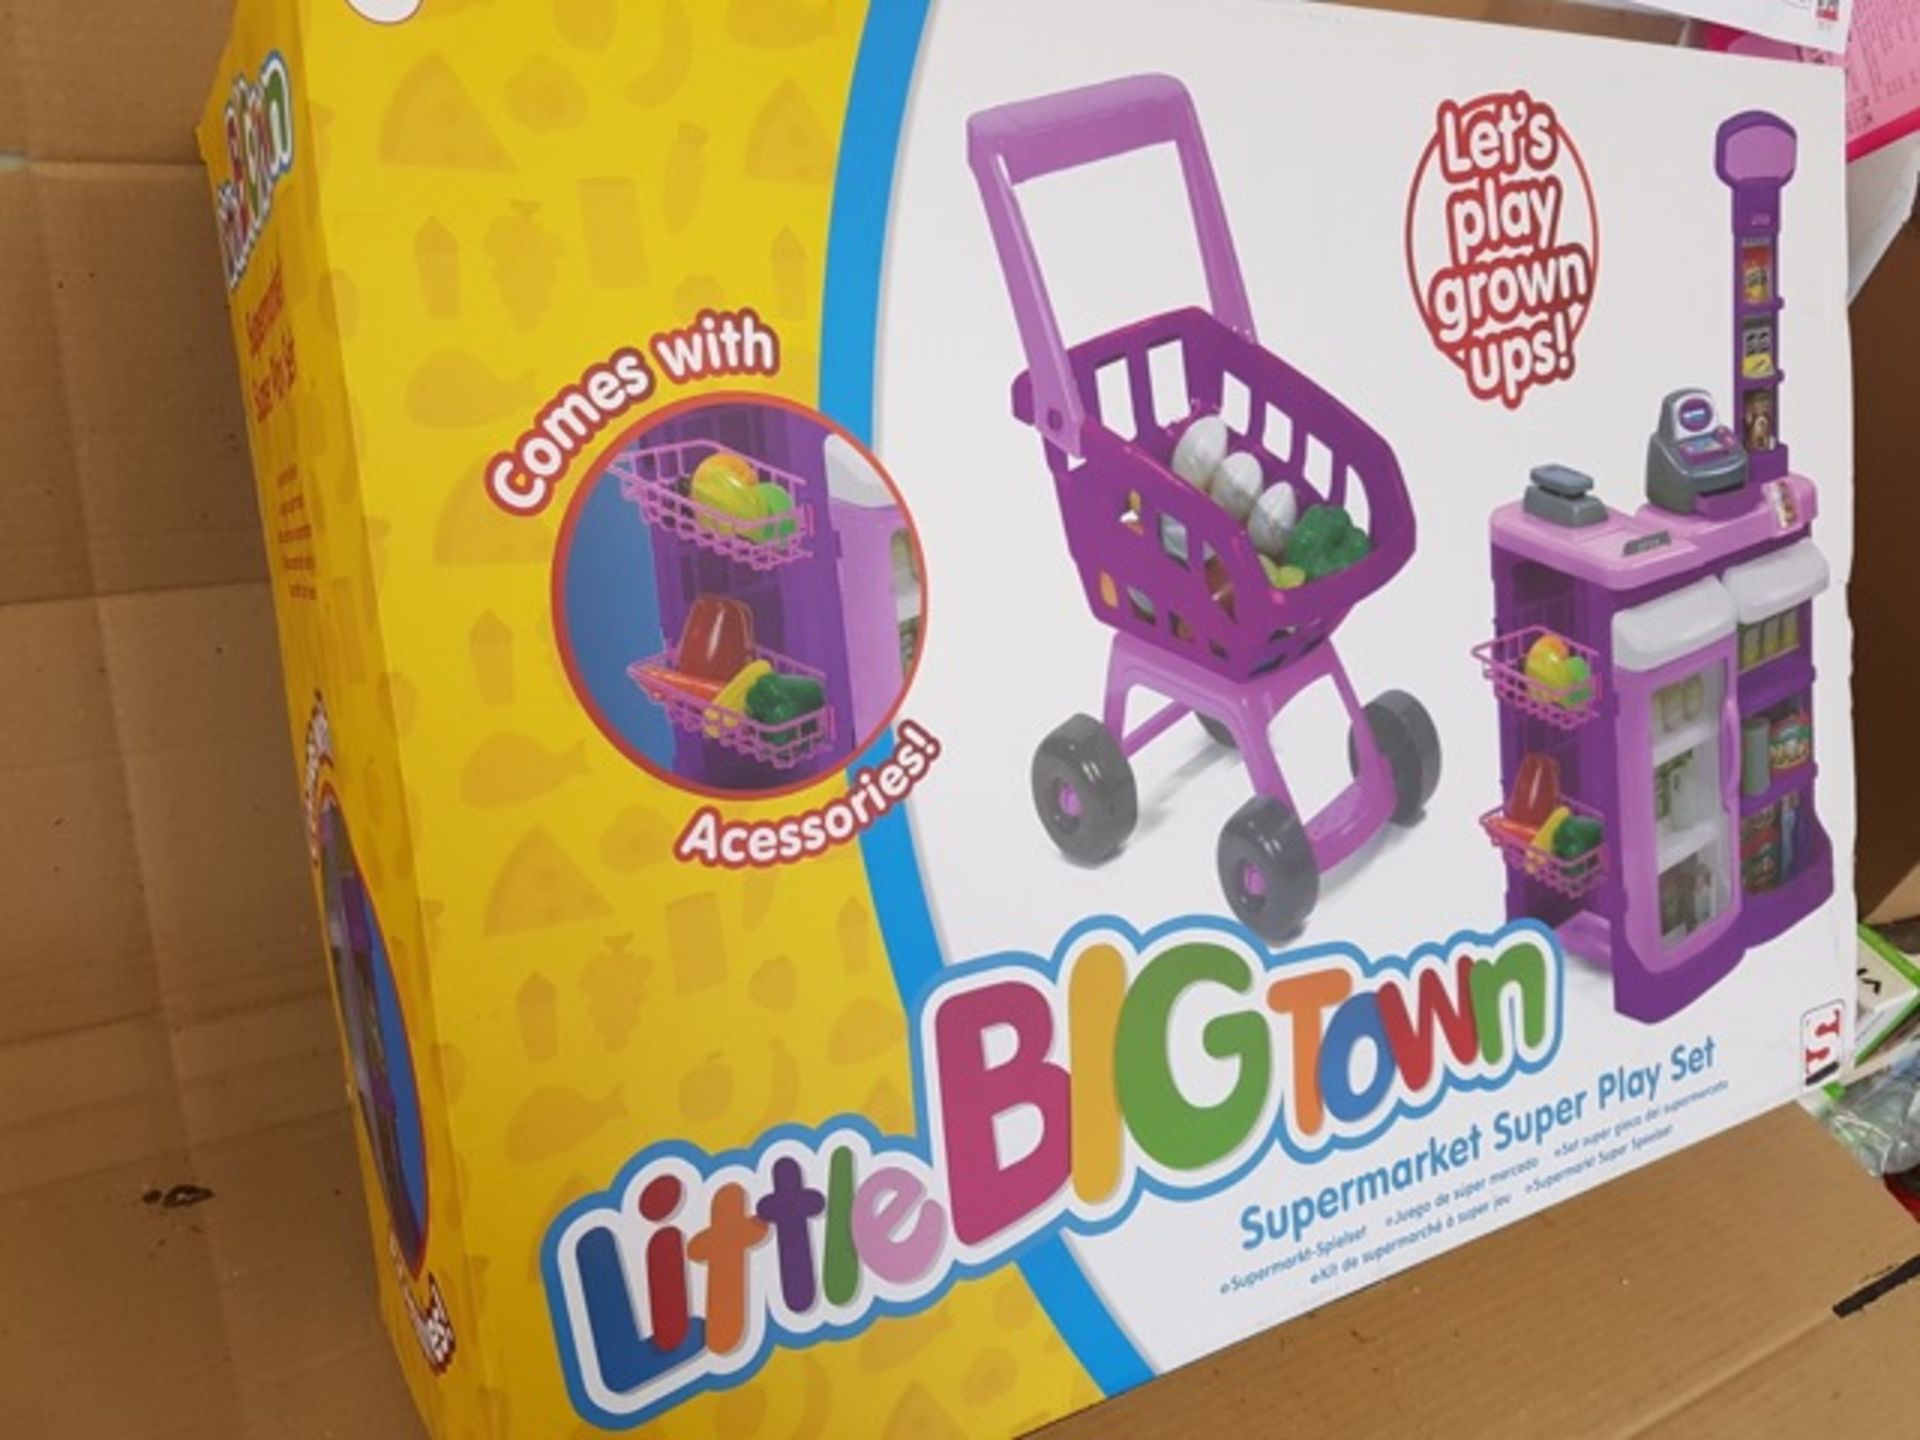 4 x Brand New Little Big Town Extra Large Supermarket Super Play Set's - RRP £99.99 each. Comes with - Image 2 of 3